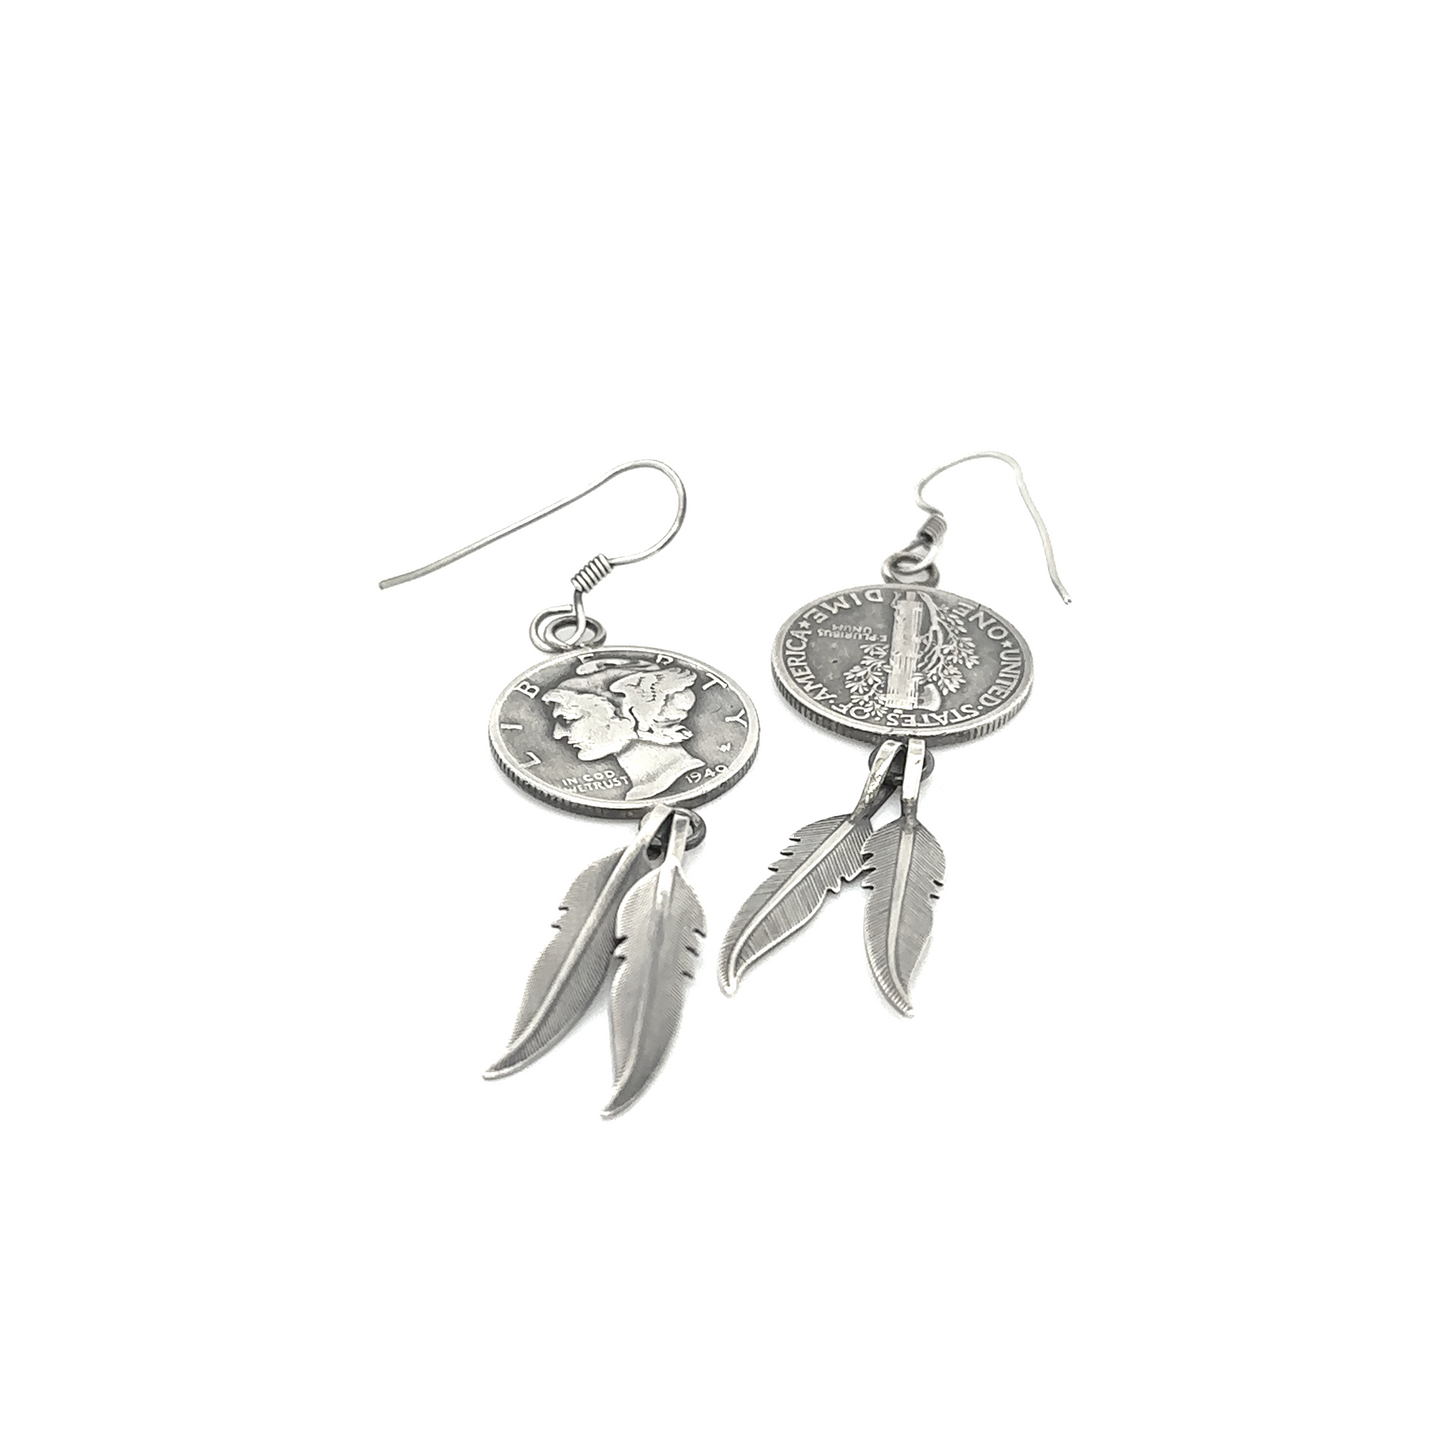 
                  
                    A pair of Native American Mercury Dime Earrings featuring a Winged Liberty Head Dime coin and feathers, produced by Super Silver.
                  
                